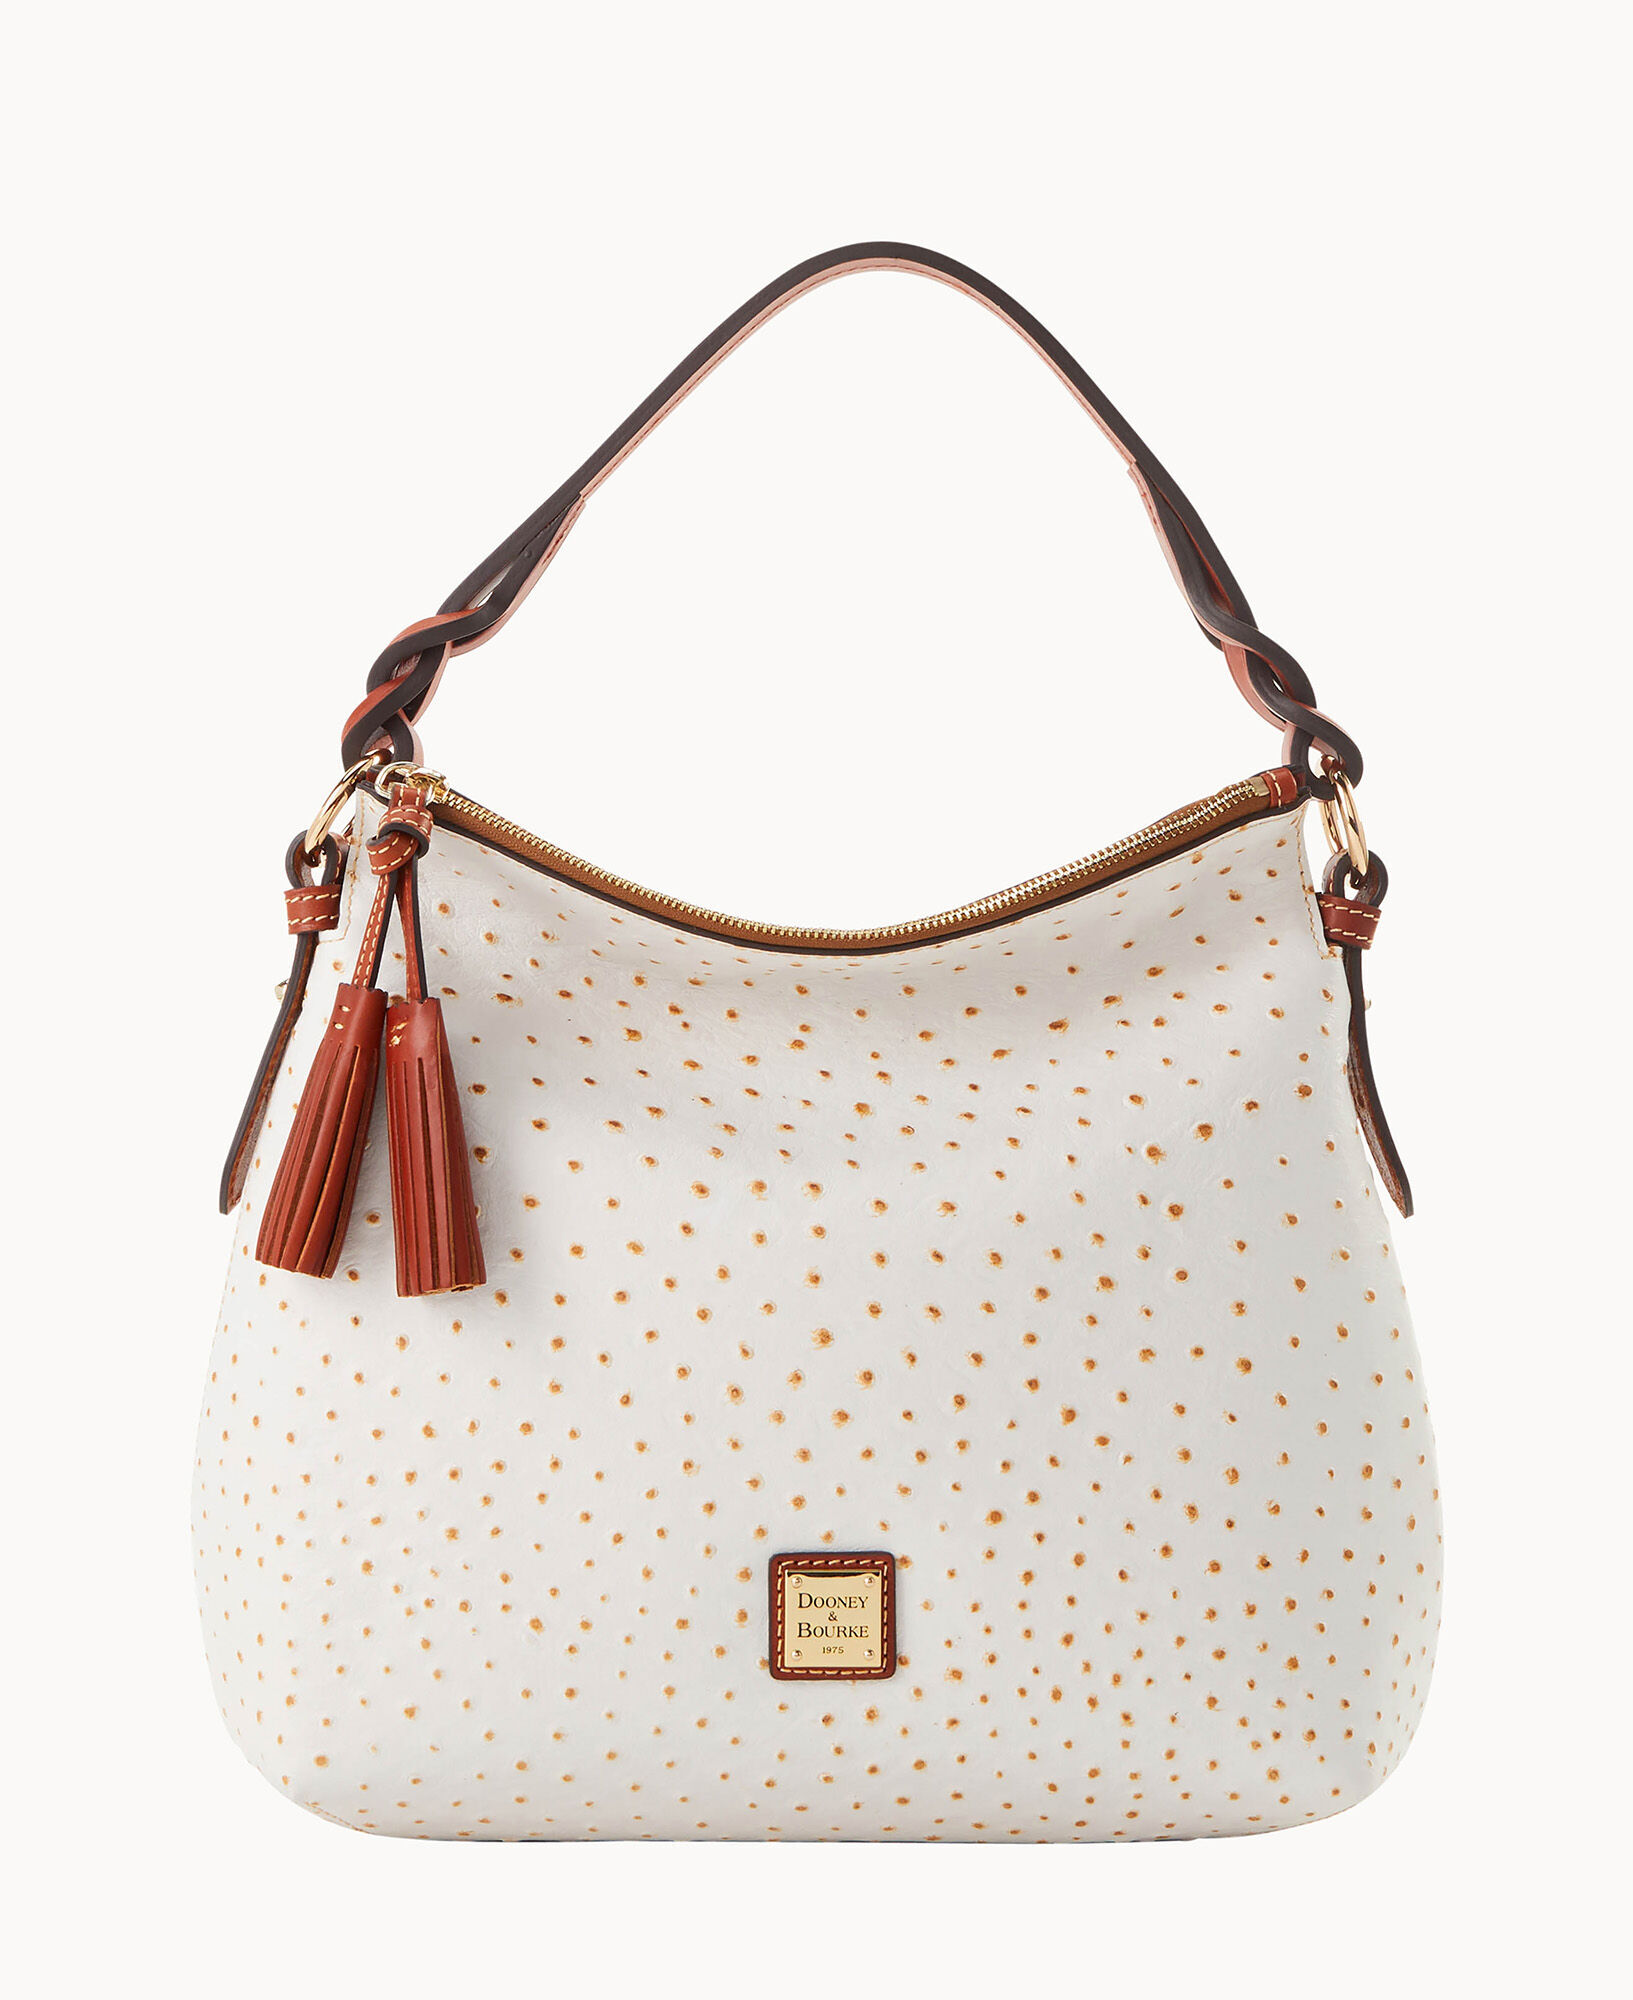 Yall! Im so sad. I think both of these dooney & bourke bags are